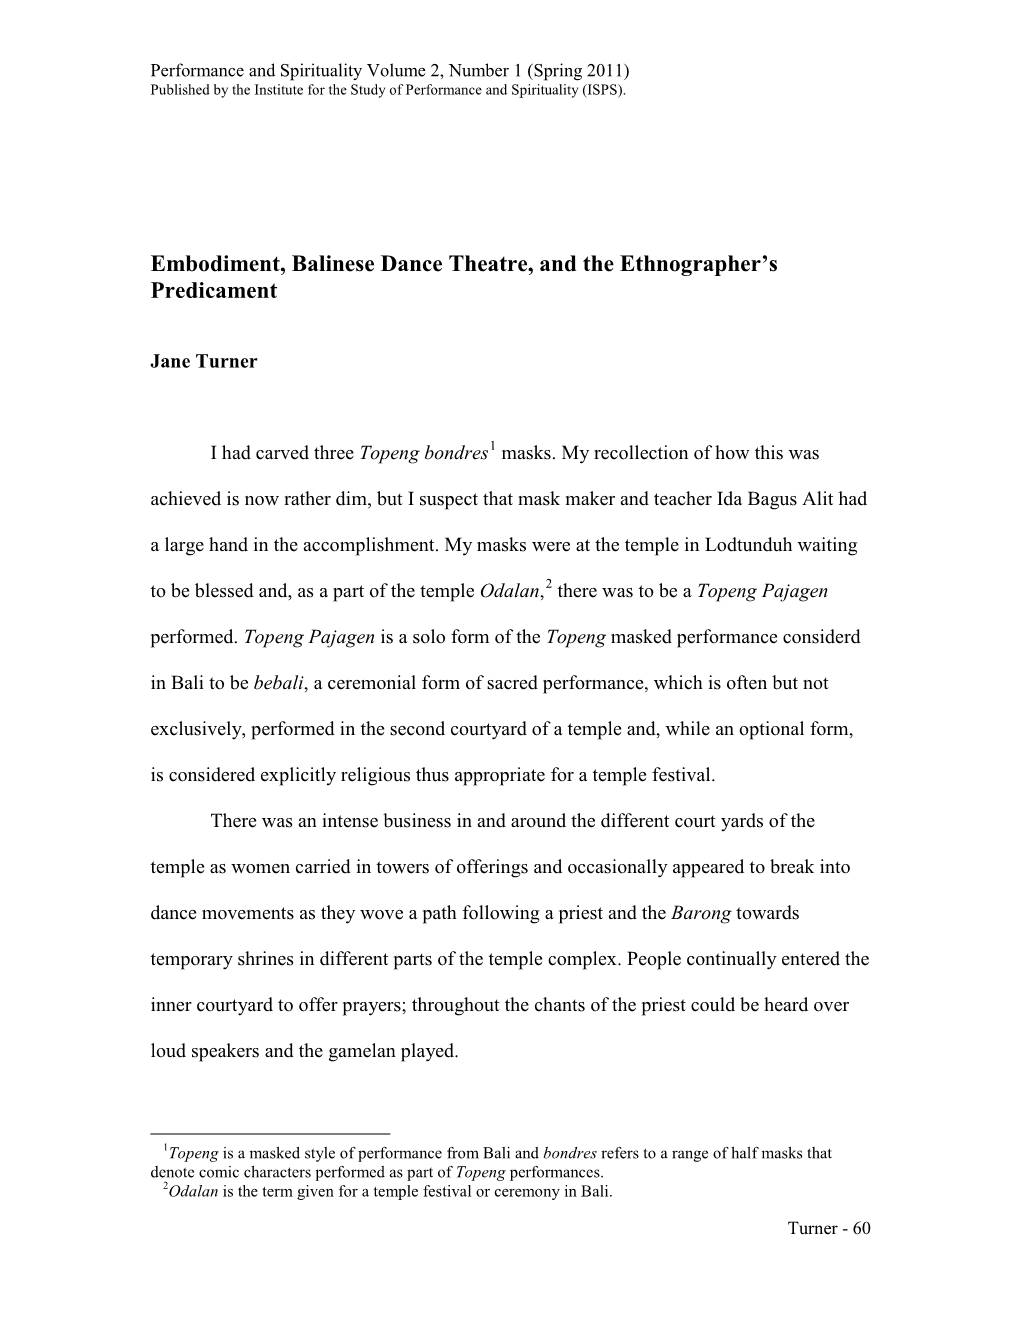 Embodiment, Balinese Dance Theatre, and the Ethnographer's Predicament